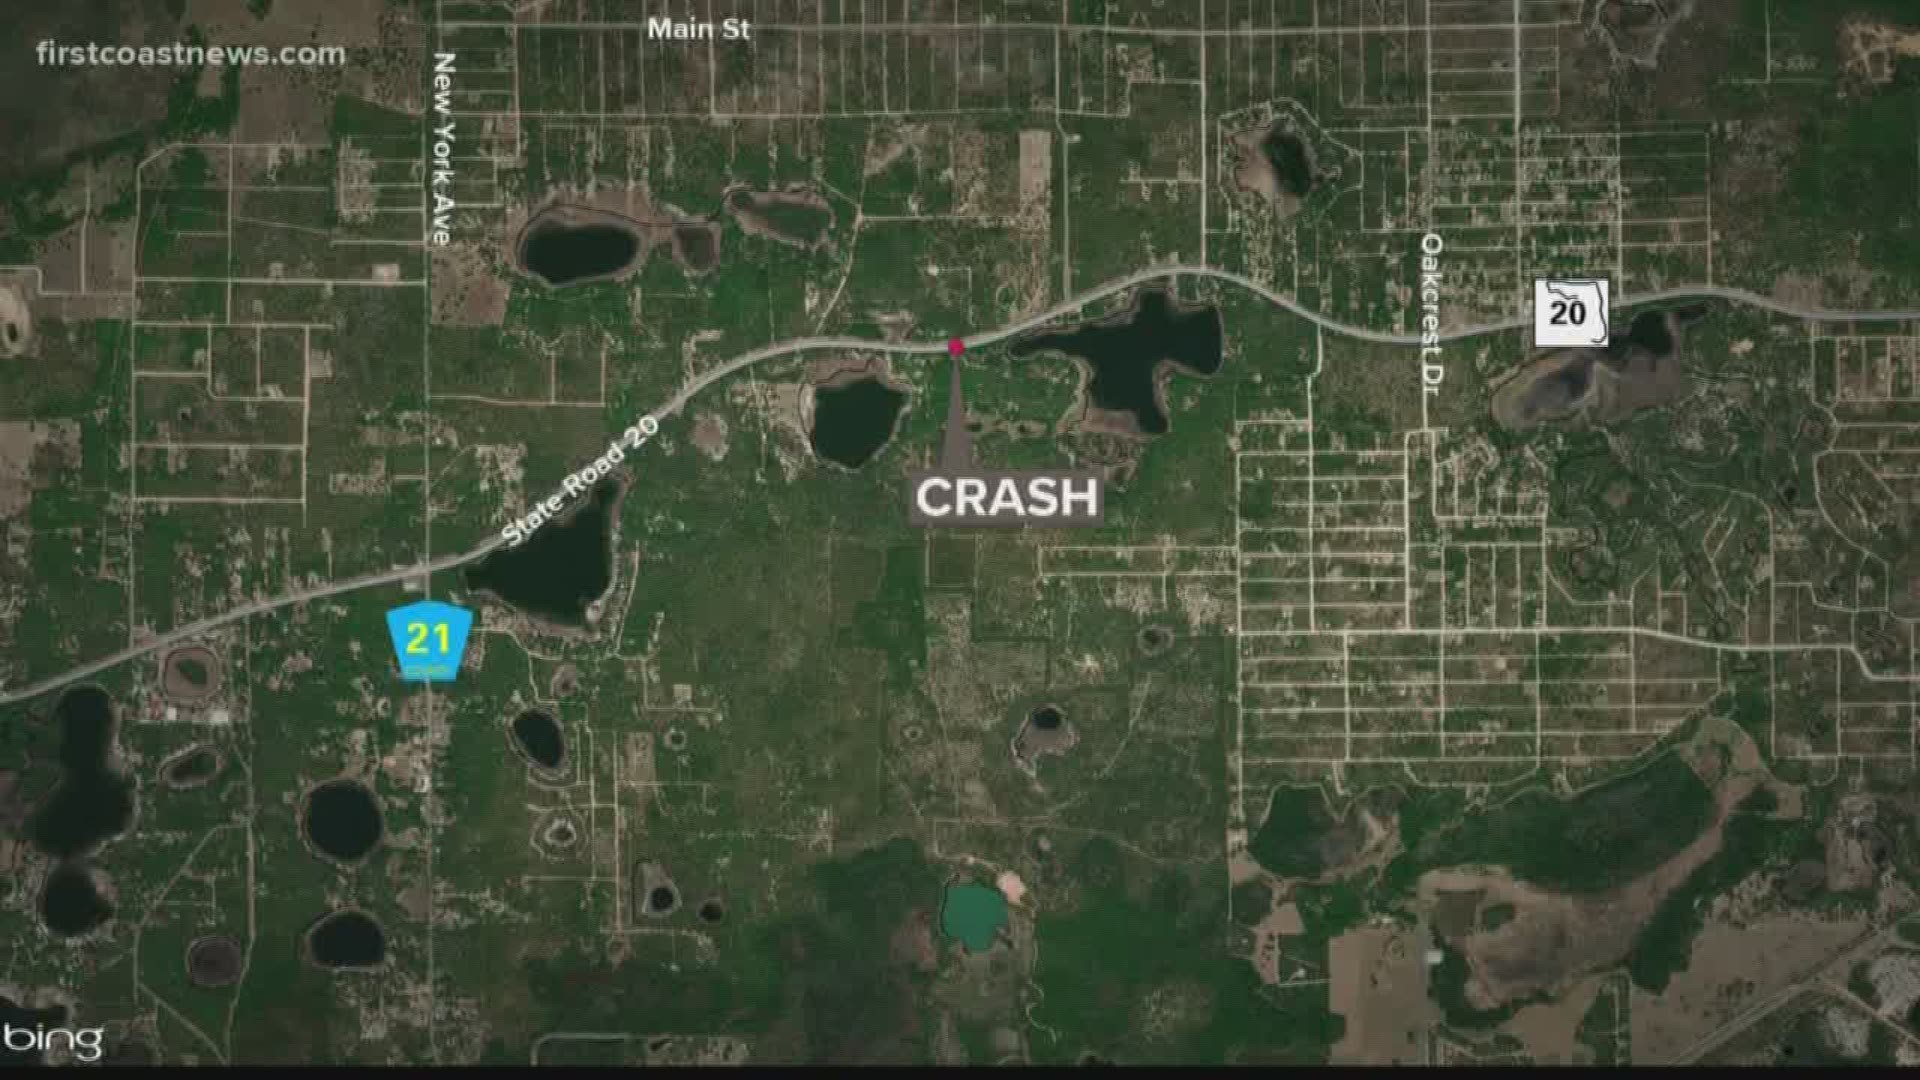 A fatal head-on crash in Putnam County shut down State Road-20 for hours Sunday, according to the Florida Highway Patrol crash map.